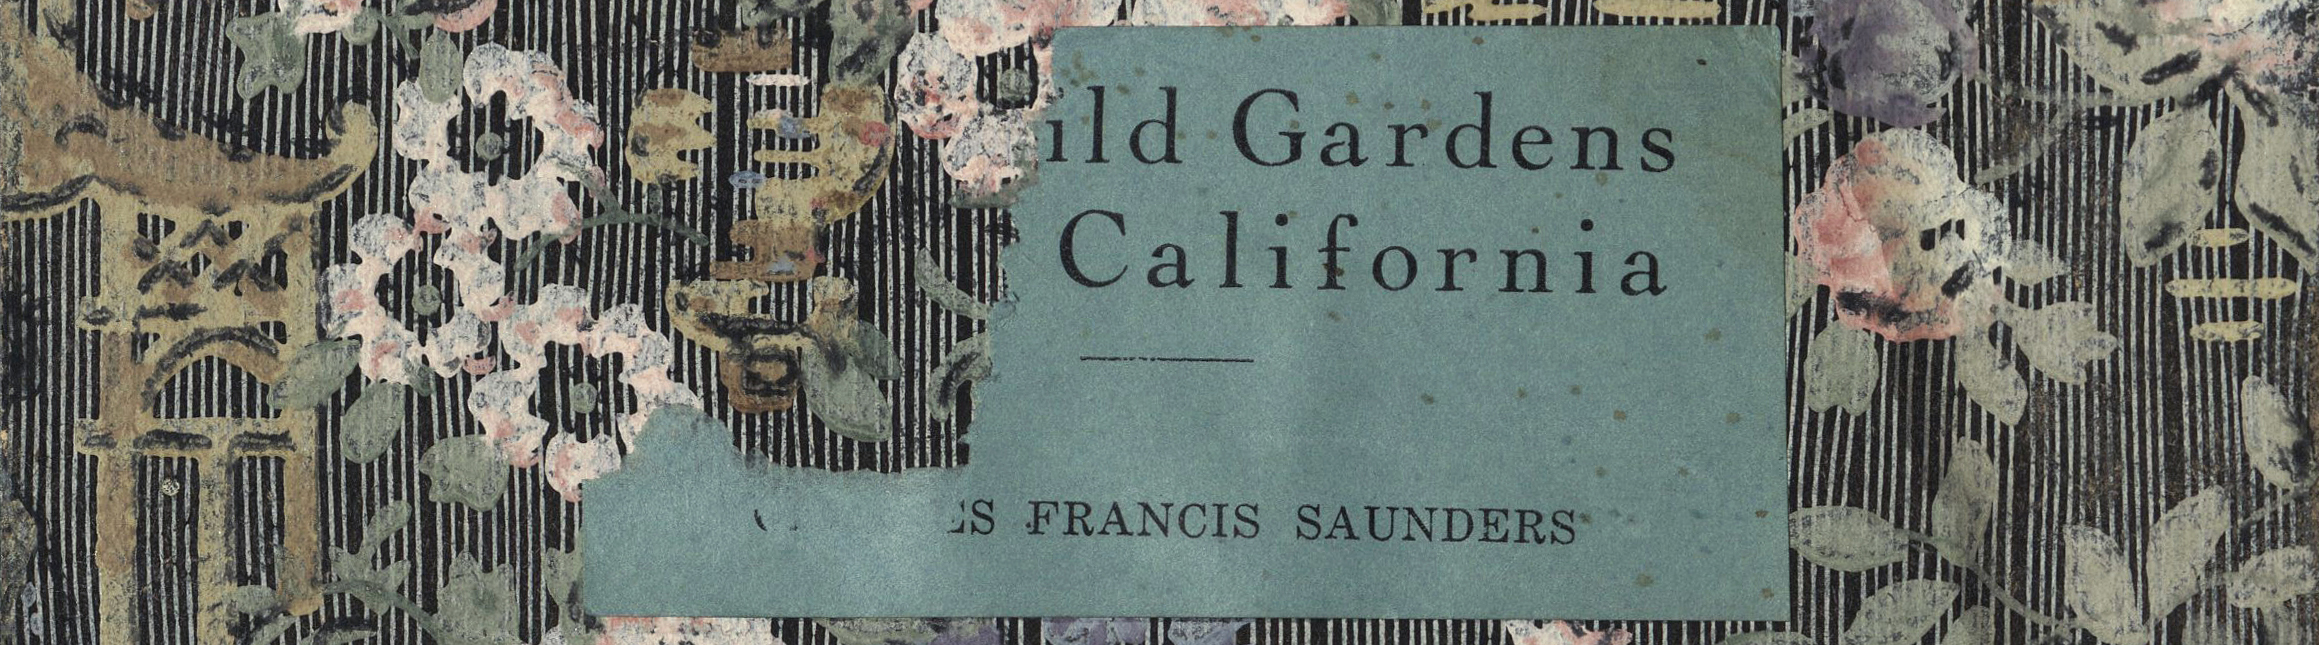 Feature image of BOOK OF THE WEEK — THE WILD GARDENS OF CALIFORNIA : An Open Book Blog Post